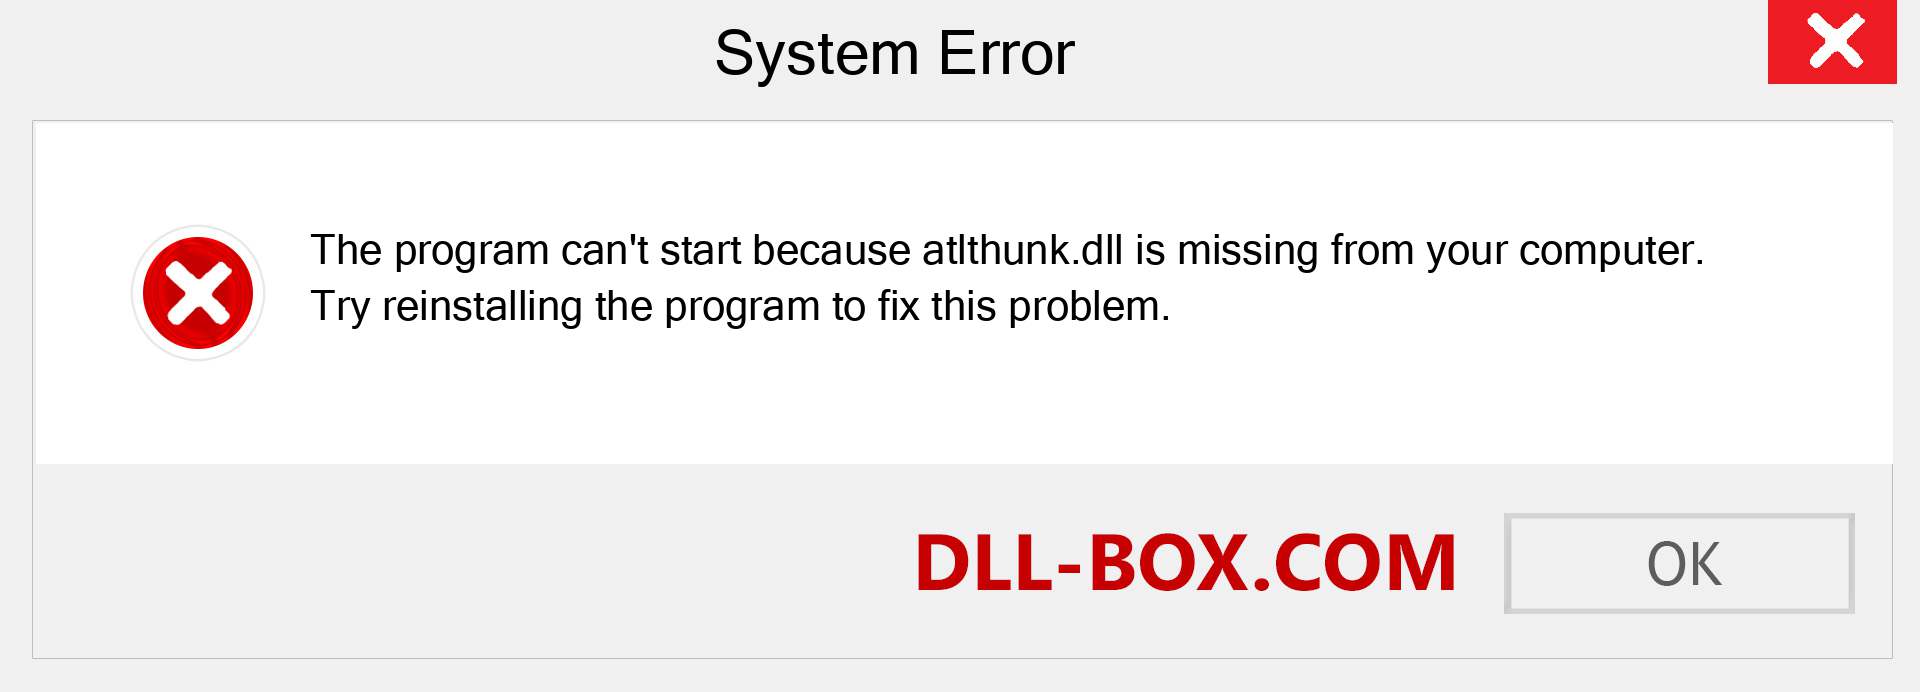  atlthunk.dll file is missing?. Download for Windows 7, 8, 10 - Fix  atlthunk dll Missing Error on Windows, photos, images